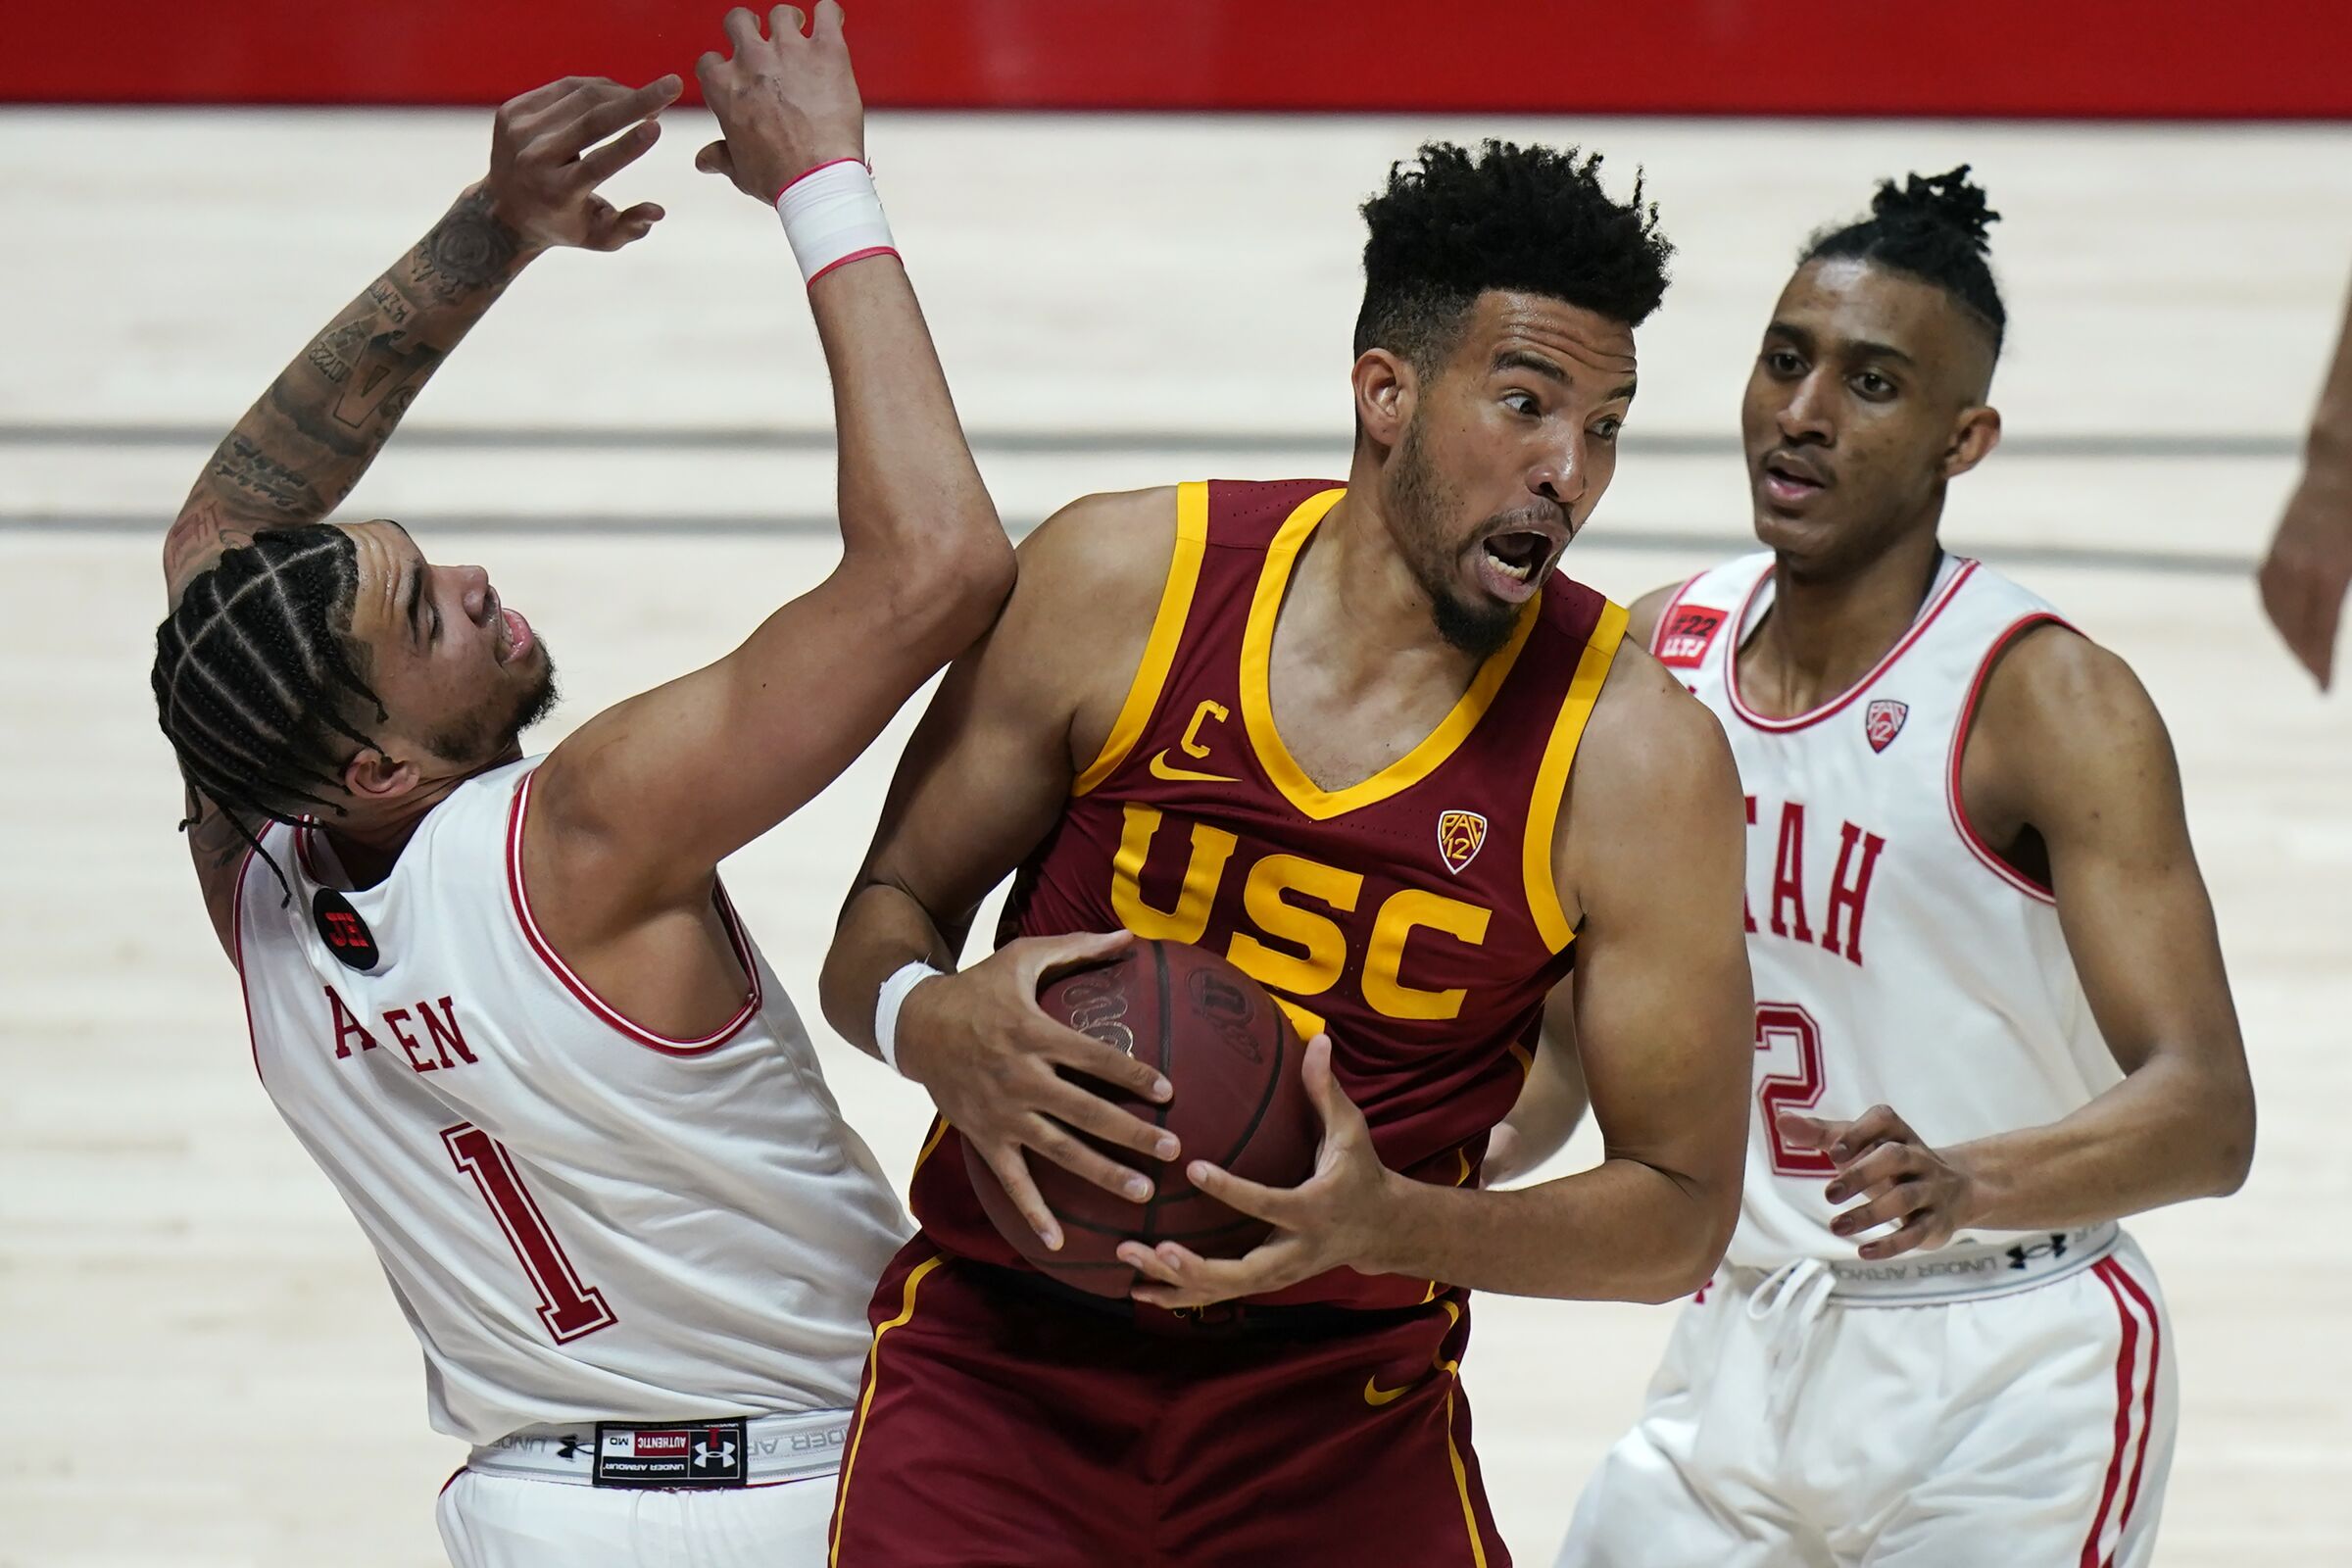 USC forward Isaiah Mobley pulls down a rebound between Utah's Timmy Allen and Ian Martinez.